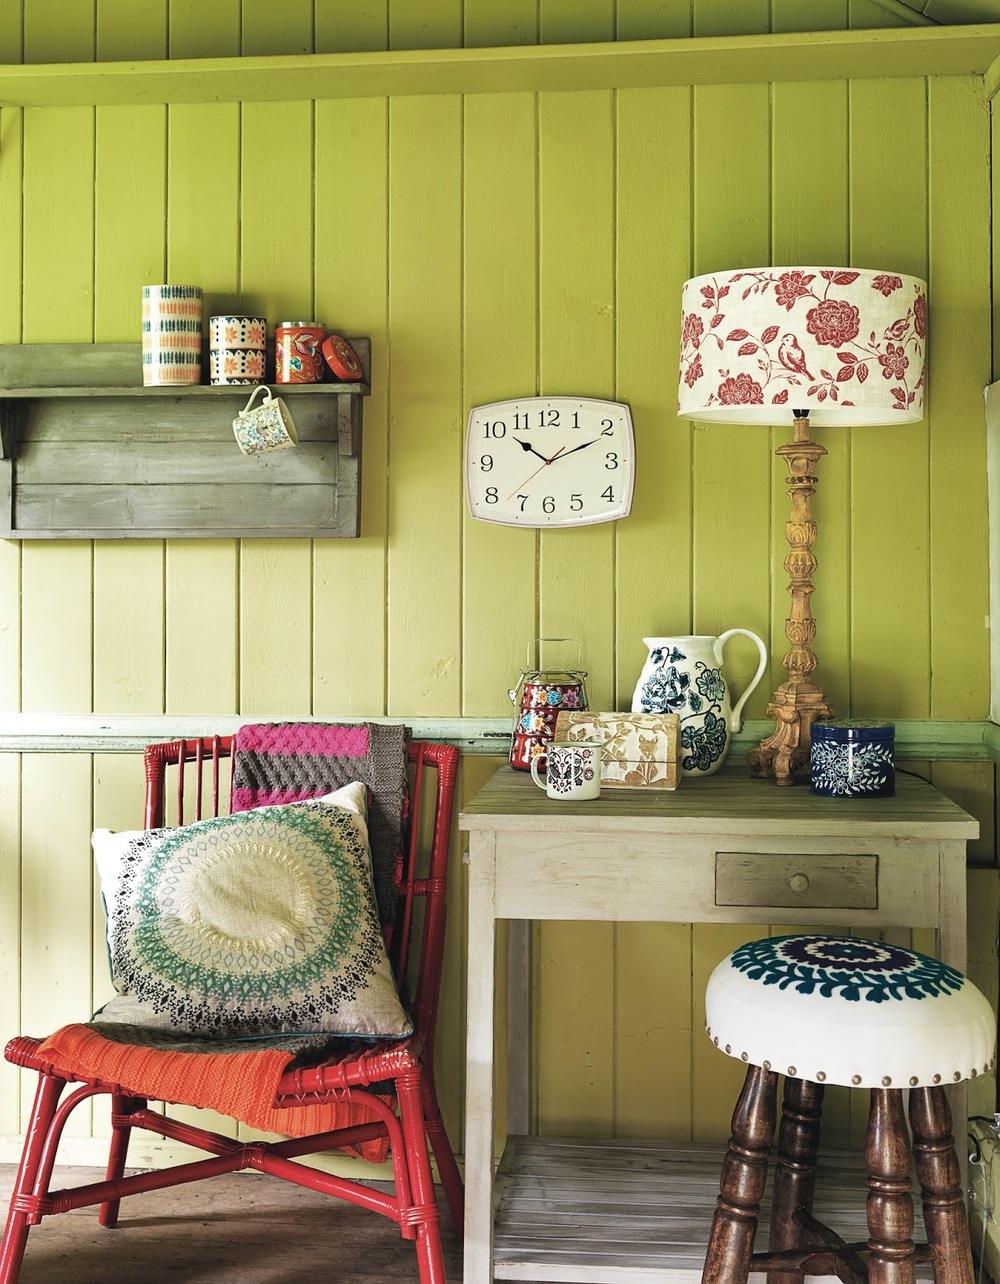 Eclectic interiors from the Home Sense A/W 15 collection